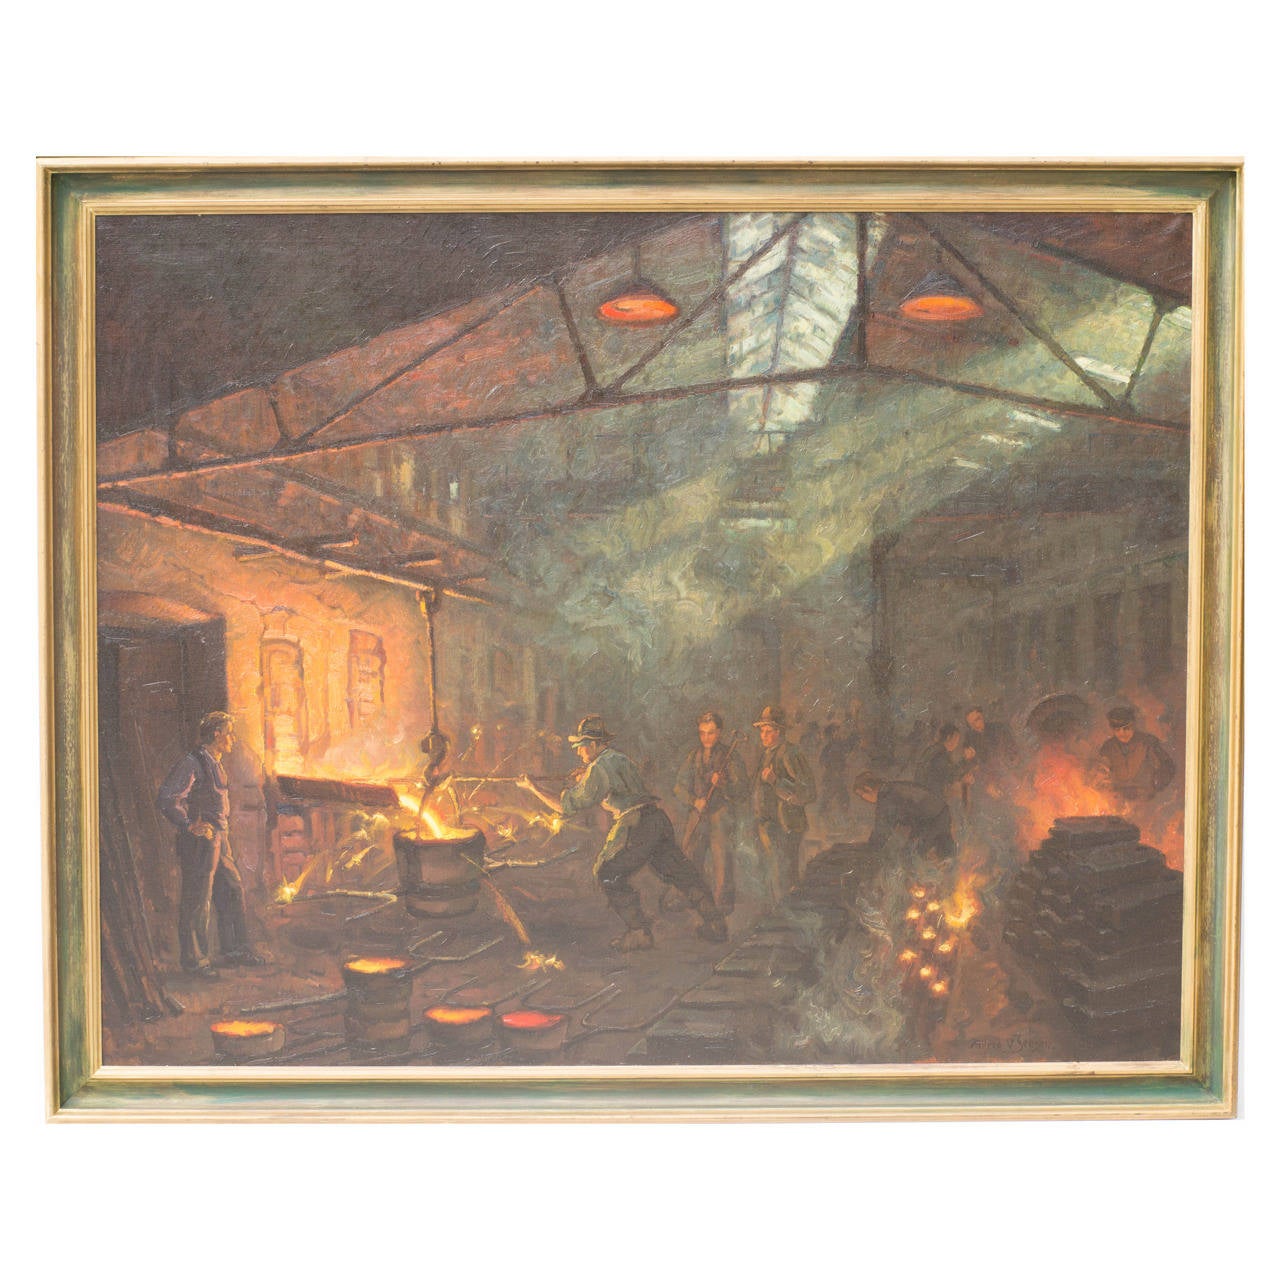 "The Foundry" Painting by Alfred Jensen 